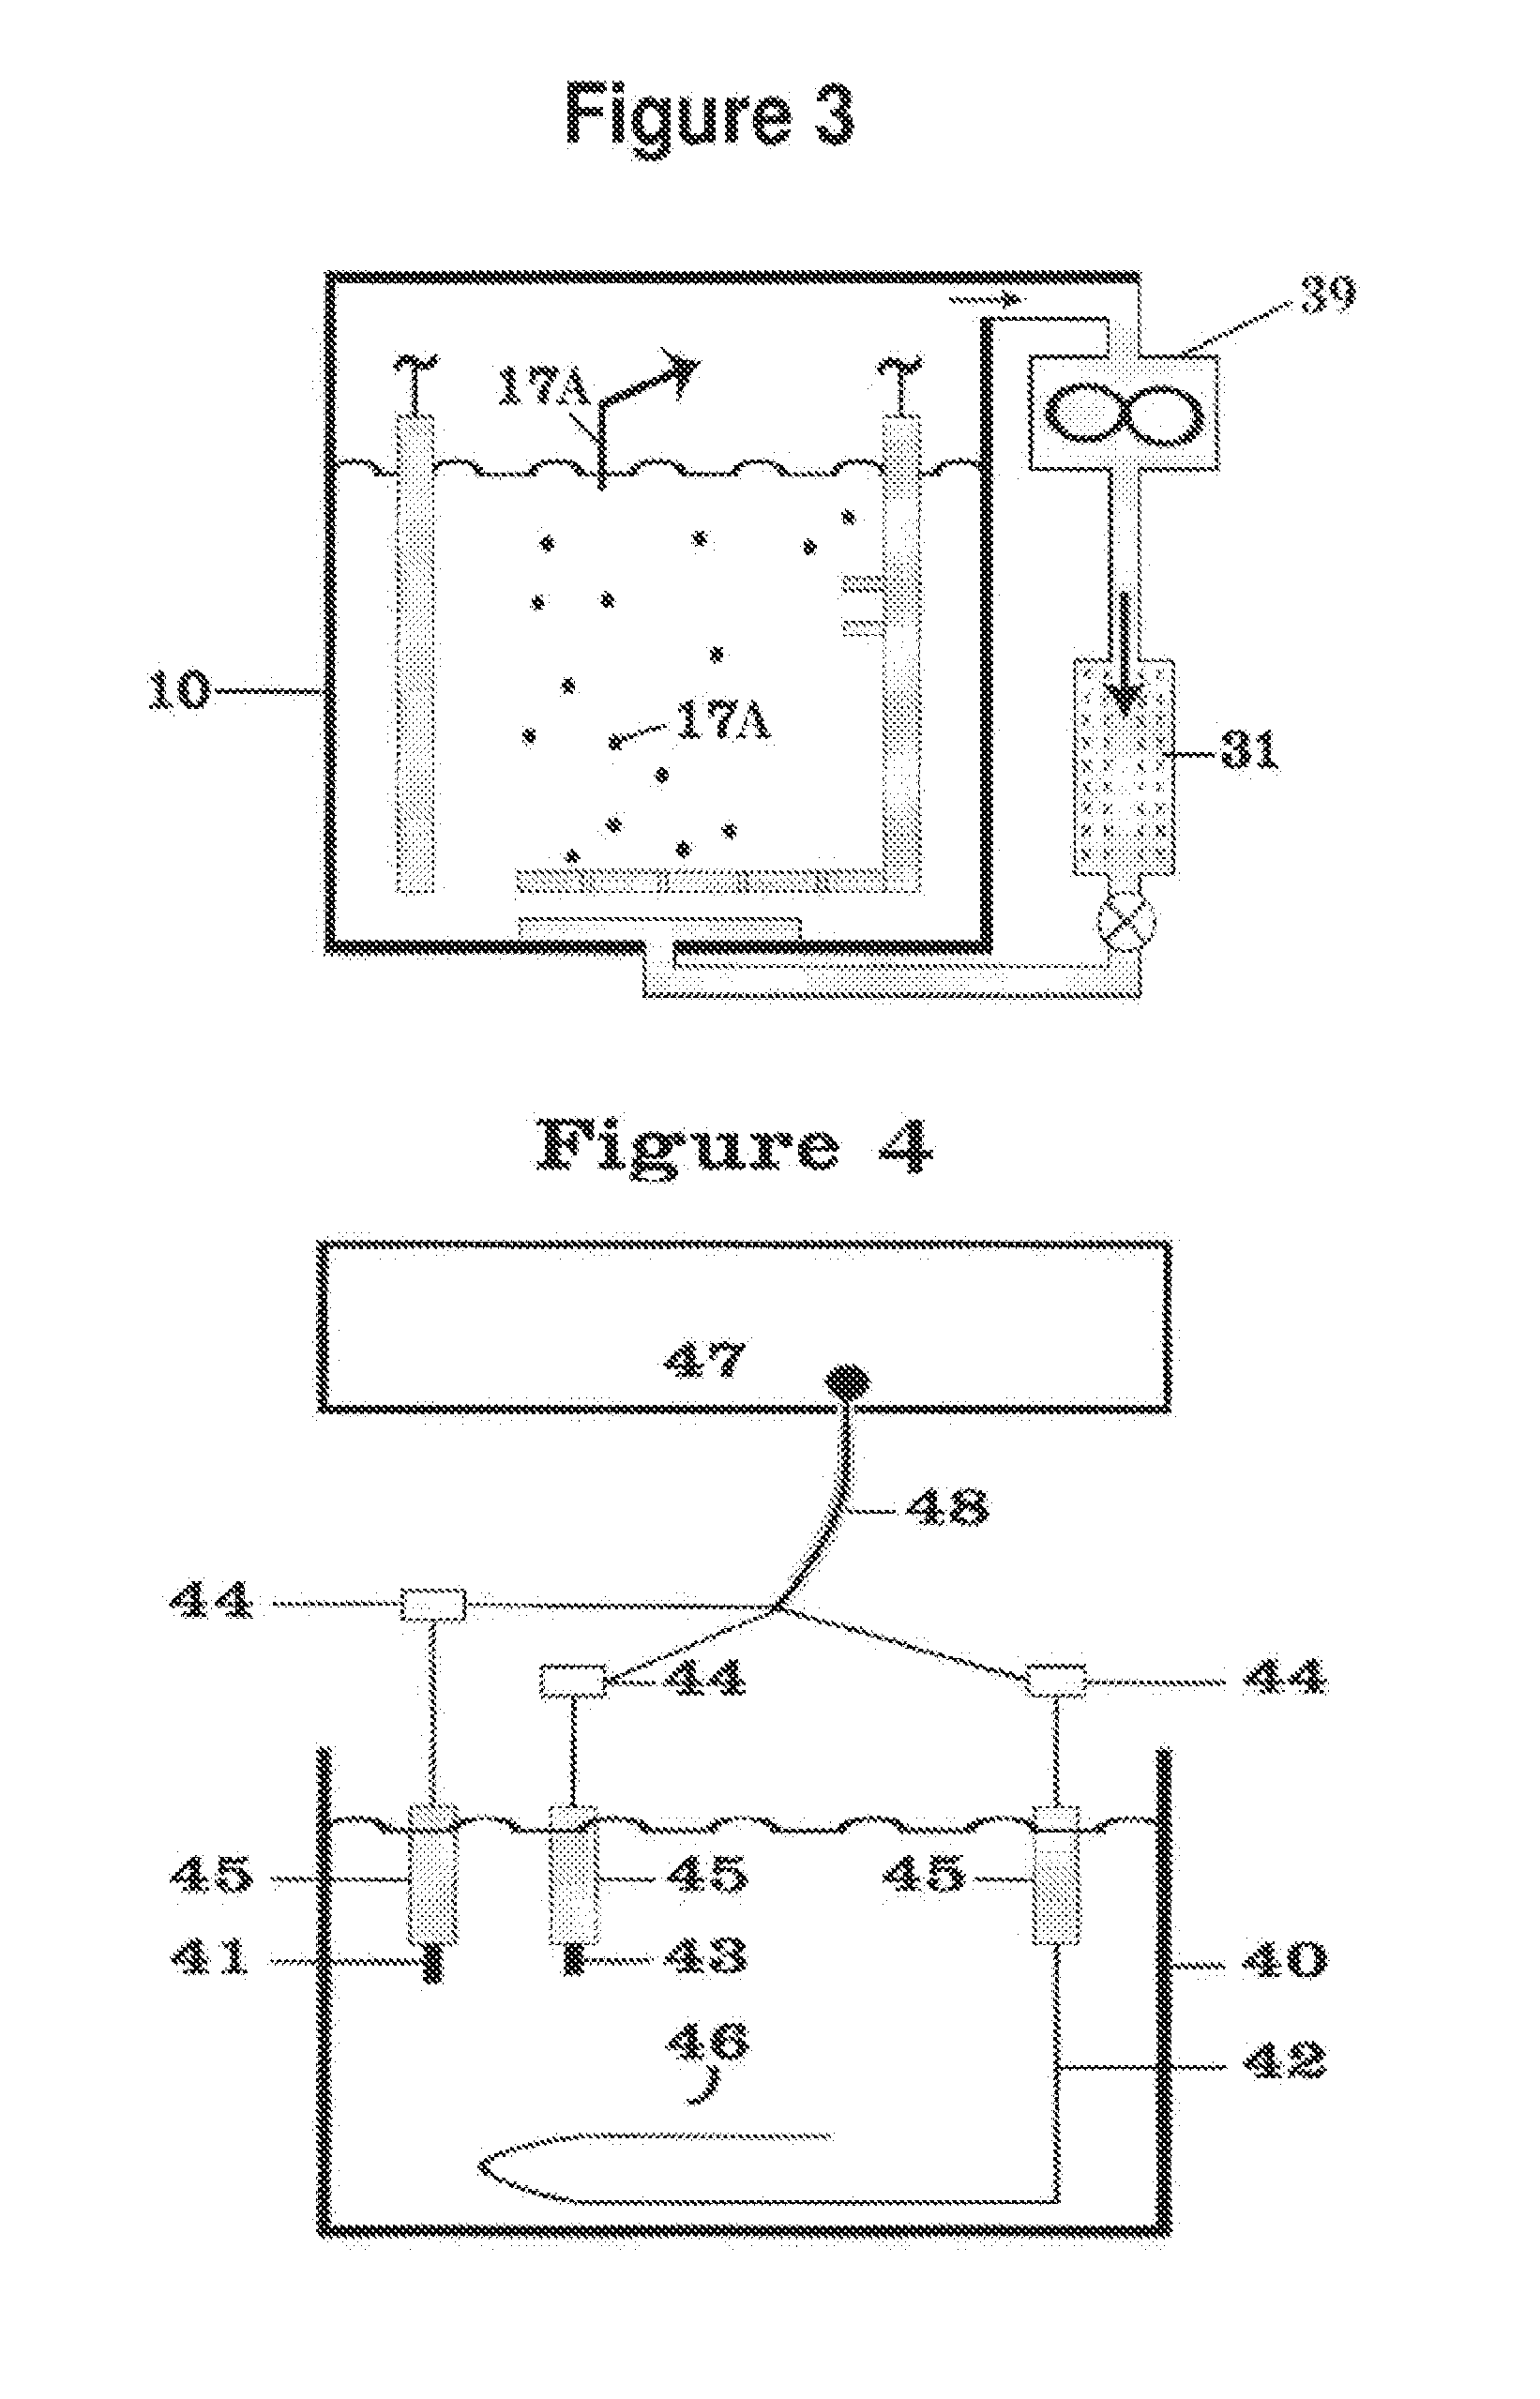 Lithium-air battery for electric vehicles and other applications using molten nitrate electrolytes